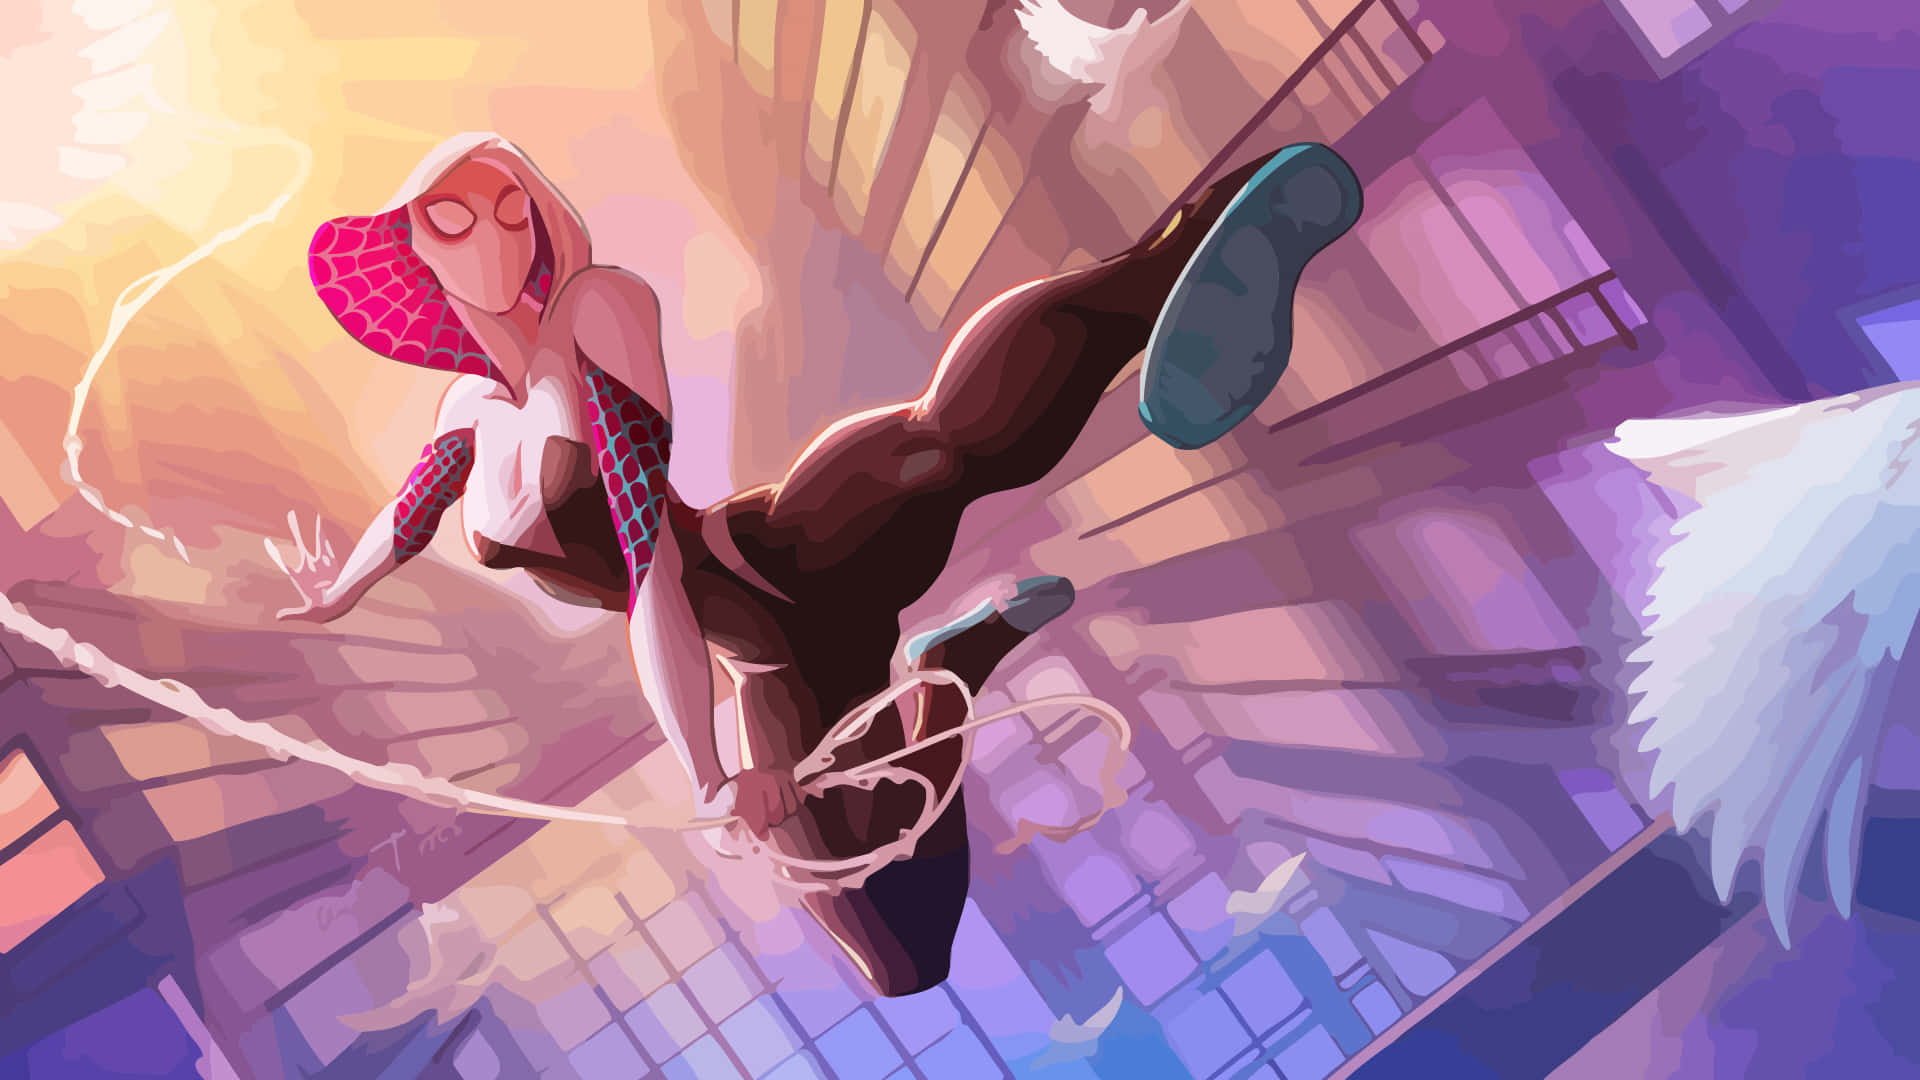 Spider Gwen ready to take on the villains!